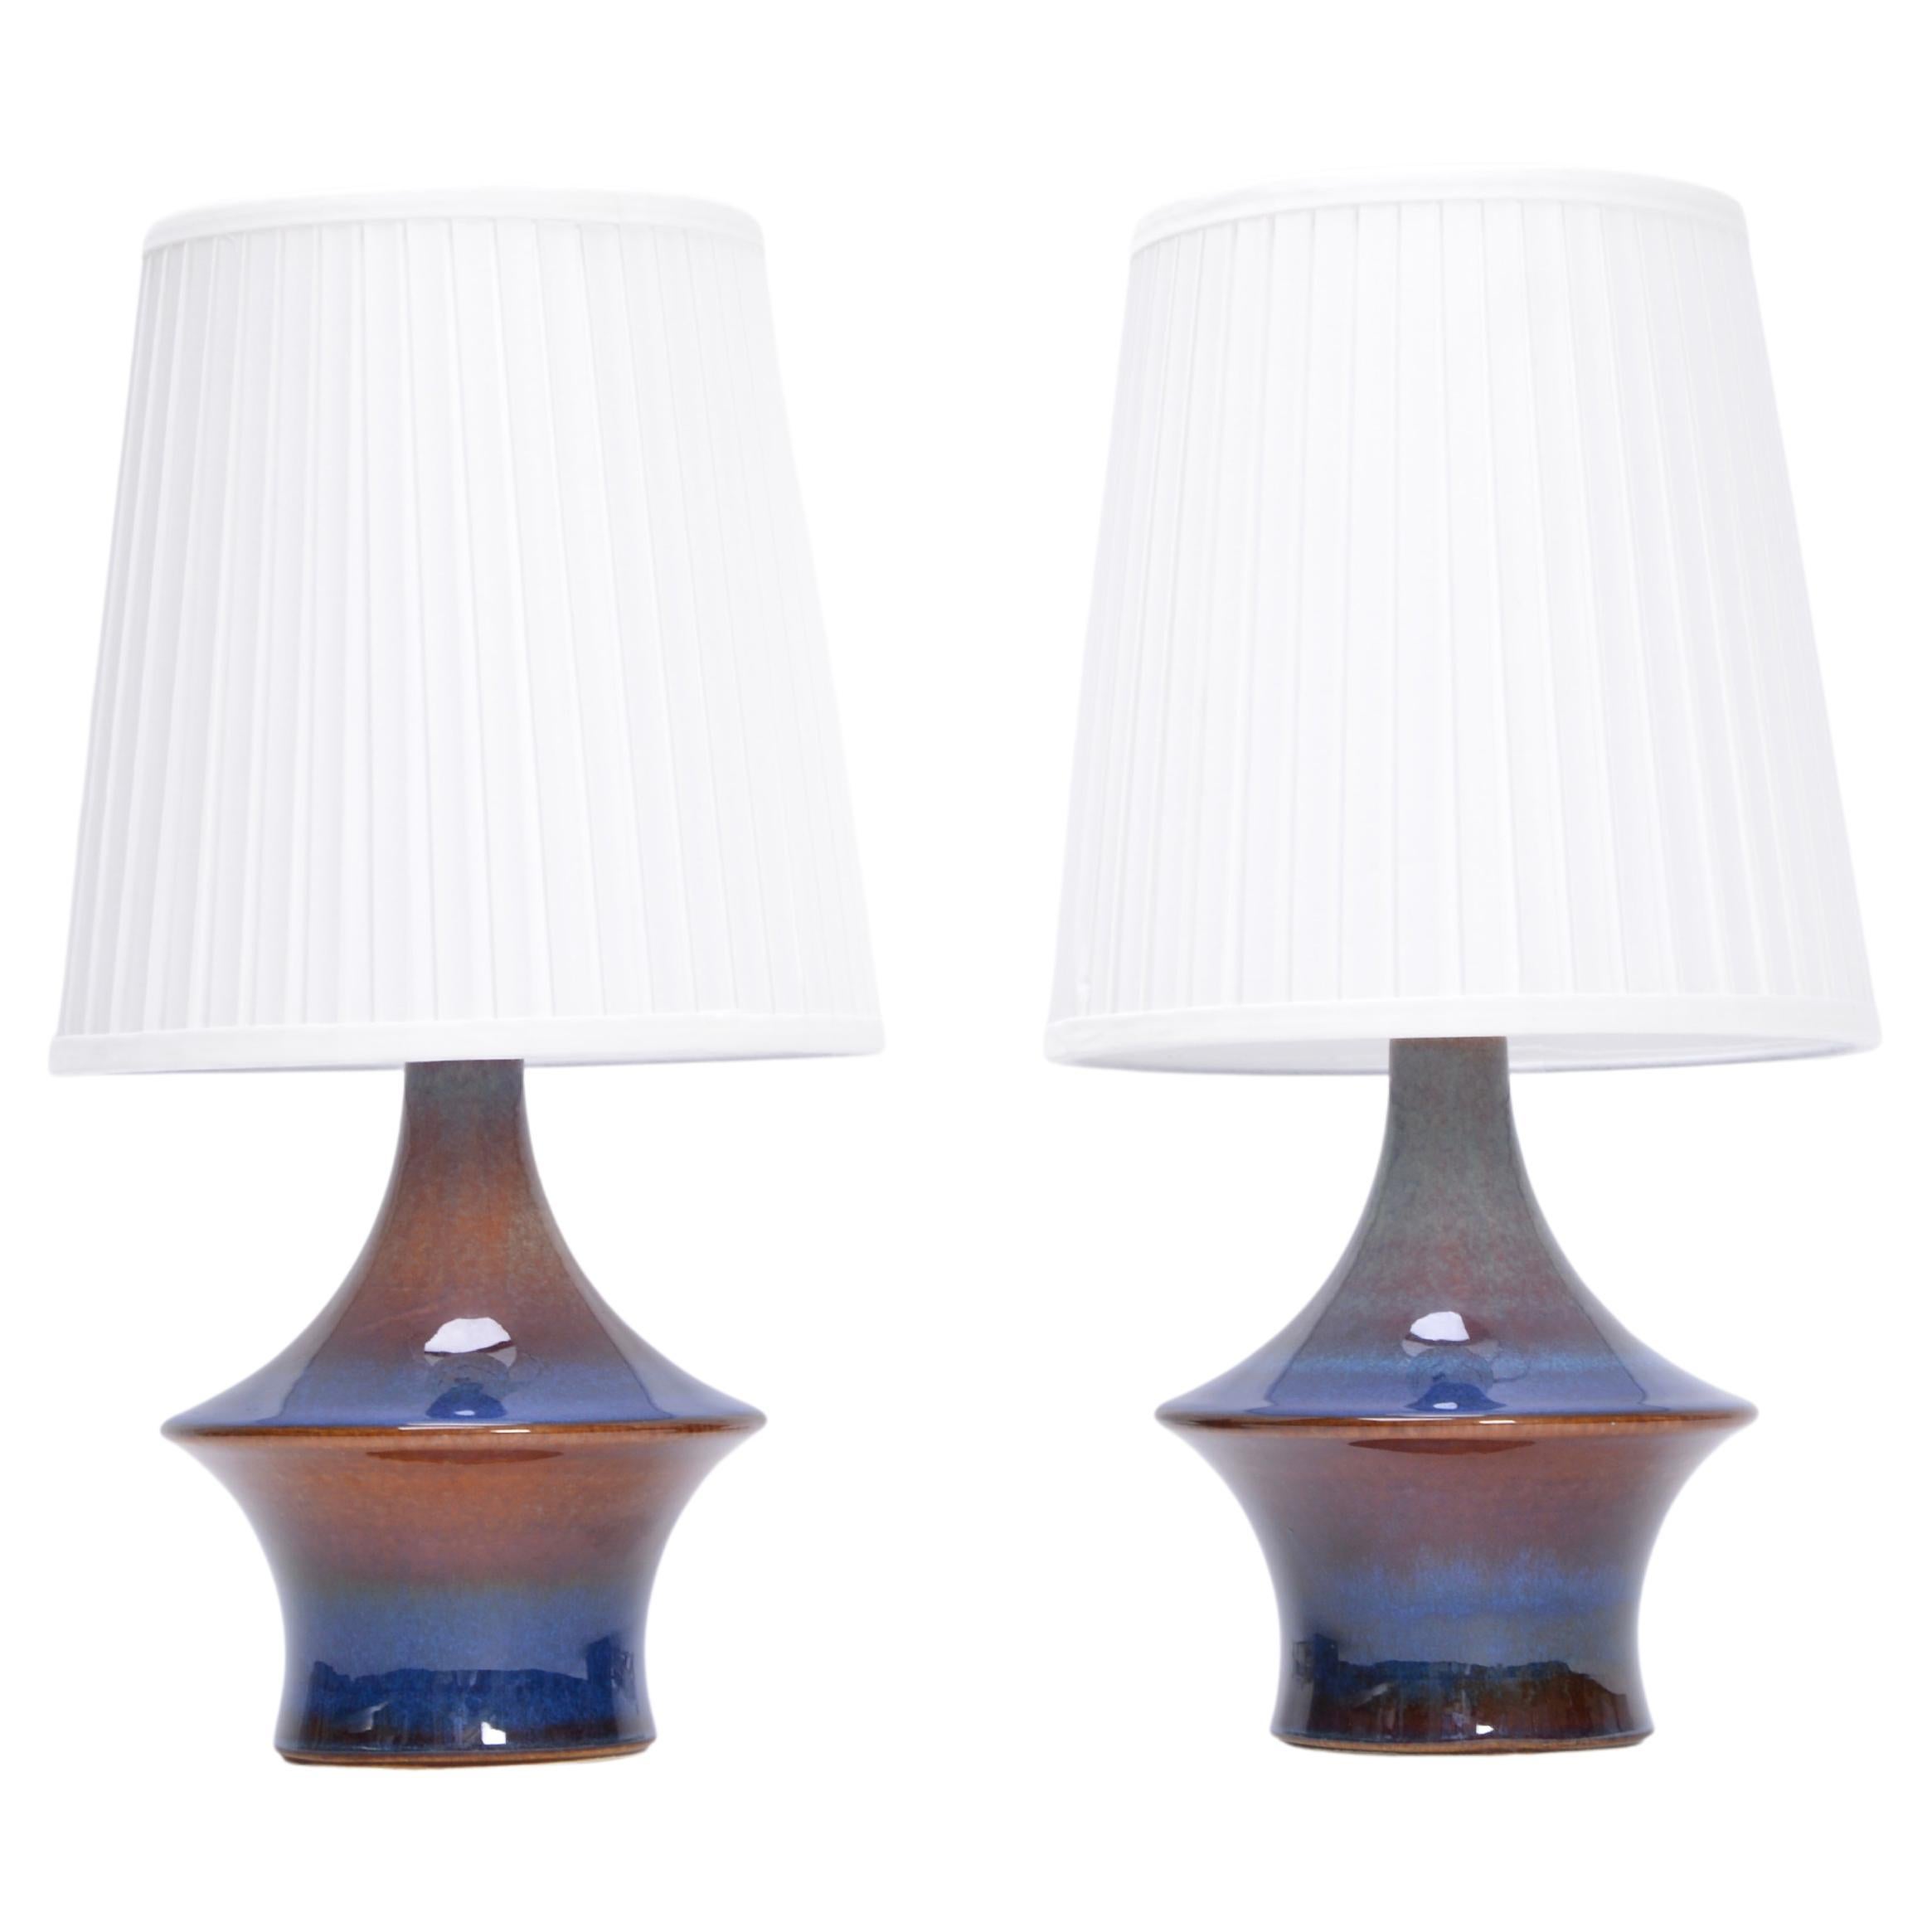 Pair of Blue Danish Mid-Century Modern Table Lamps Model 1044 by Soholm